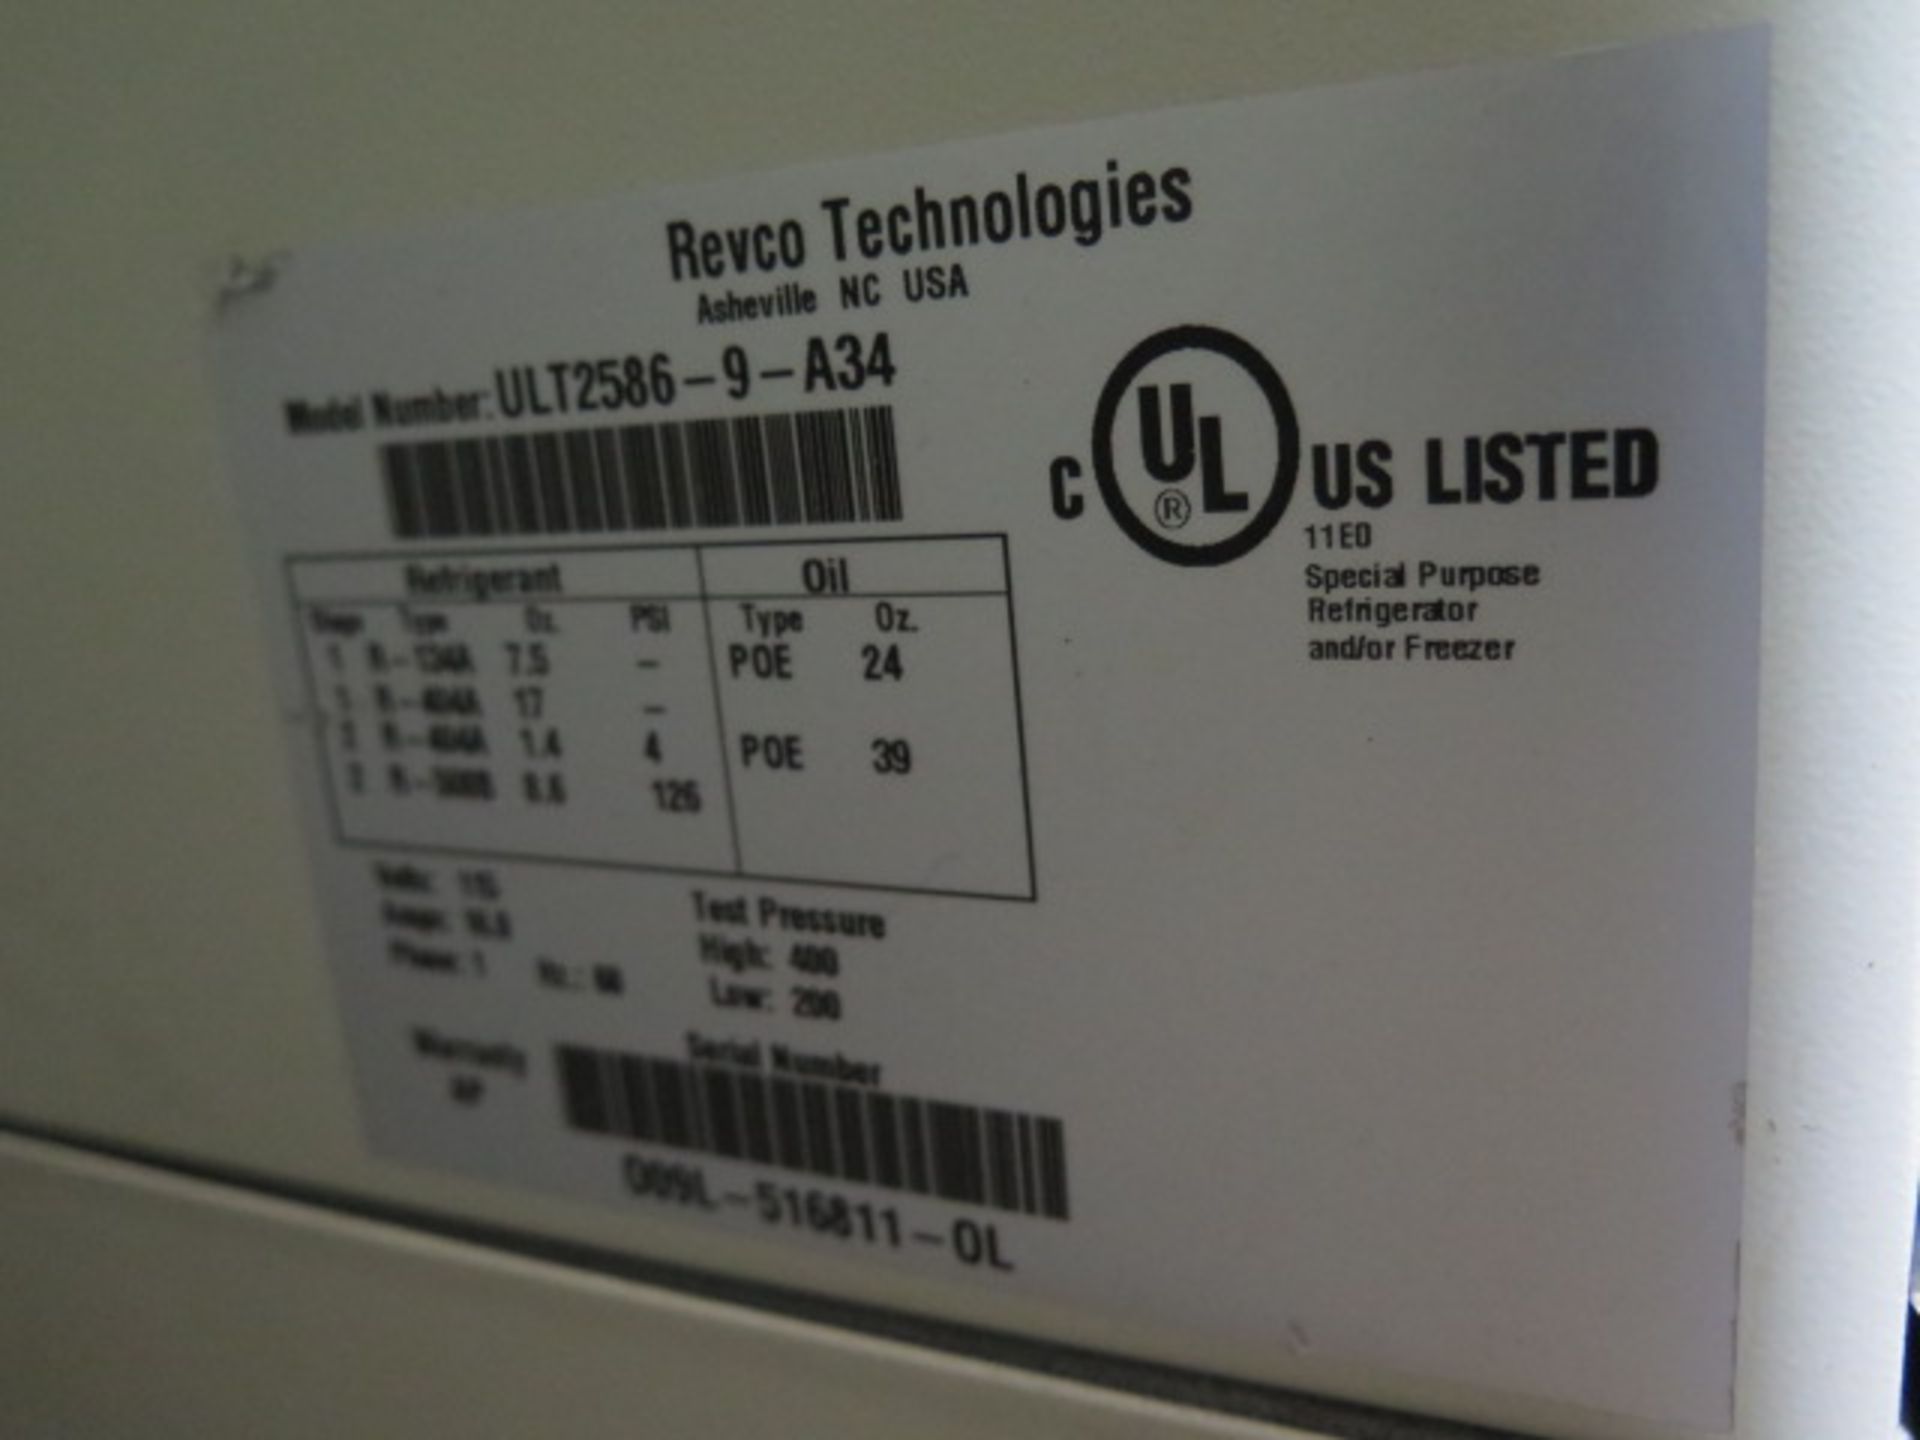 Revco ULT2586-9-A34 -80 Degree Lab Freezer (SOLD AS-IS - NO WARRANTY) - Image 8 of 8